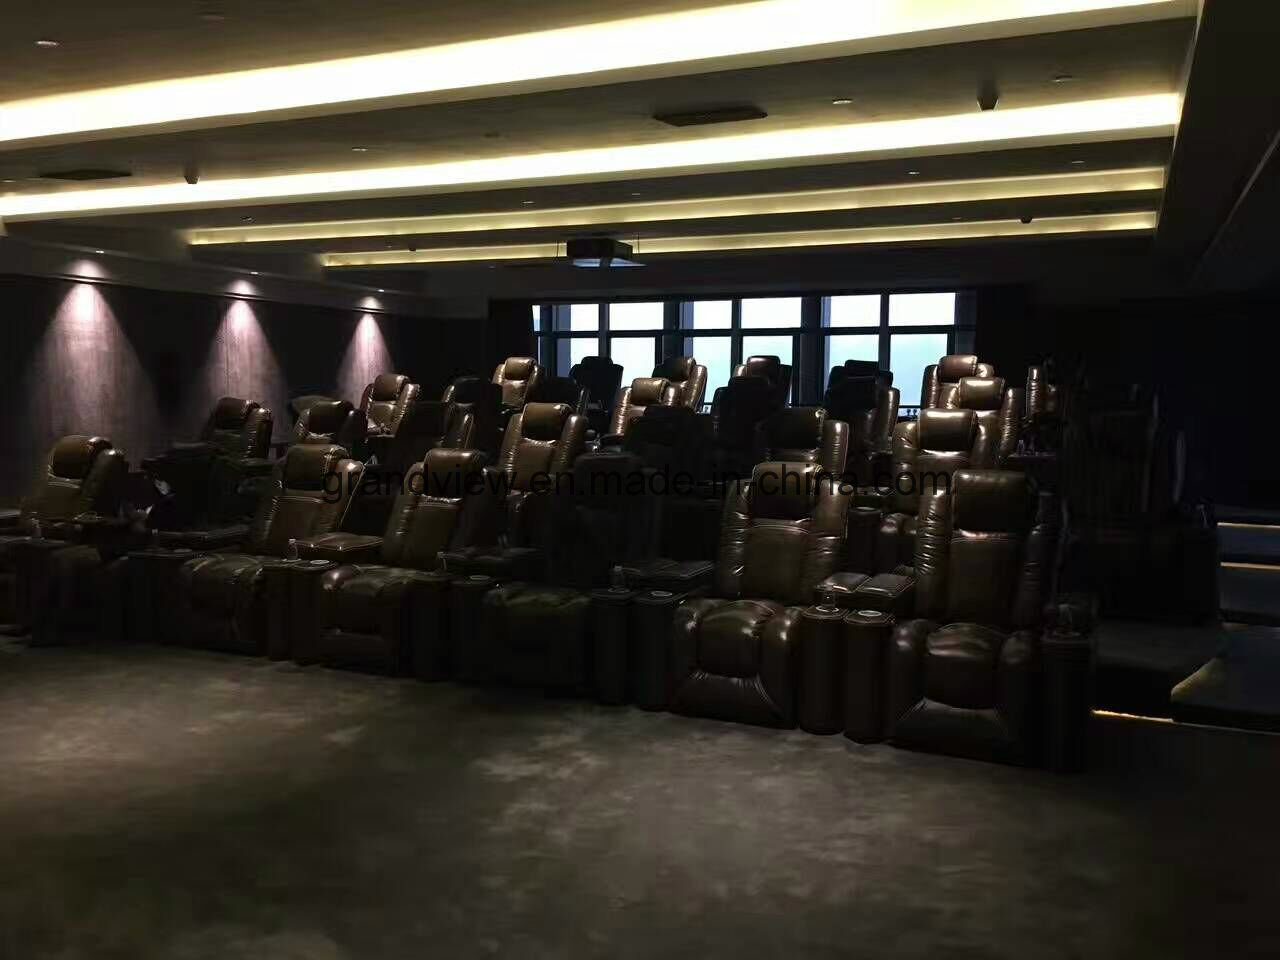 Hot Sale Commercial Movie Chairs with High Back Top Genuien Leather Cinema Theater Seats